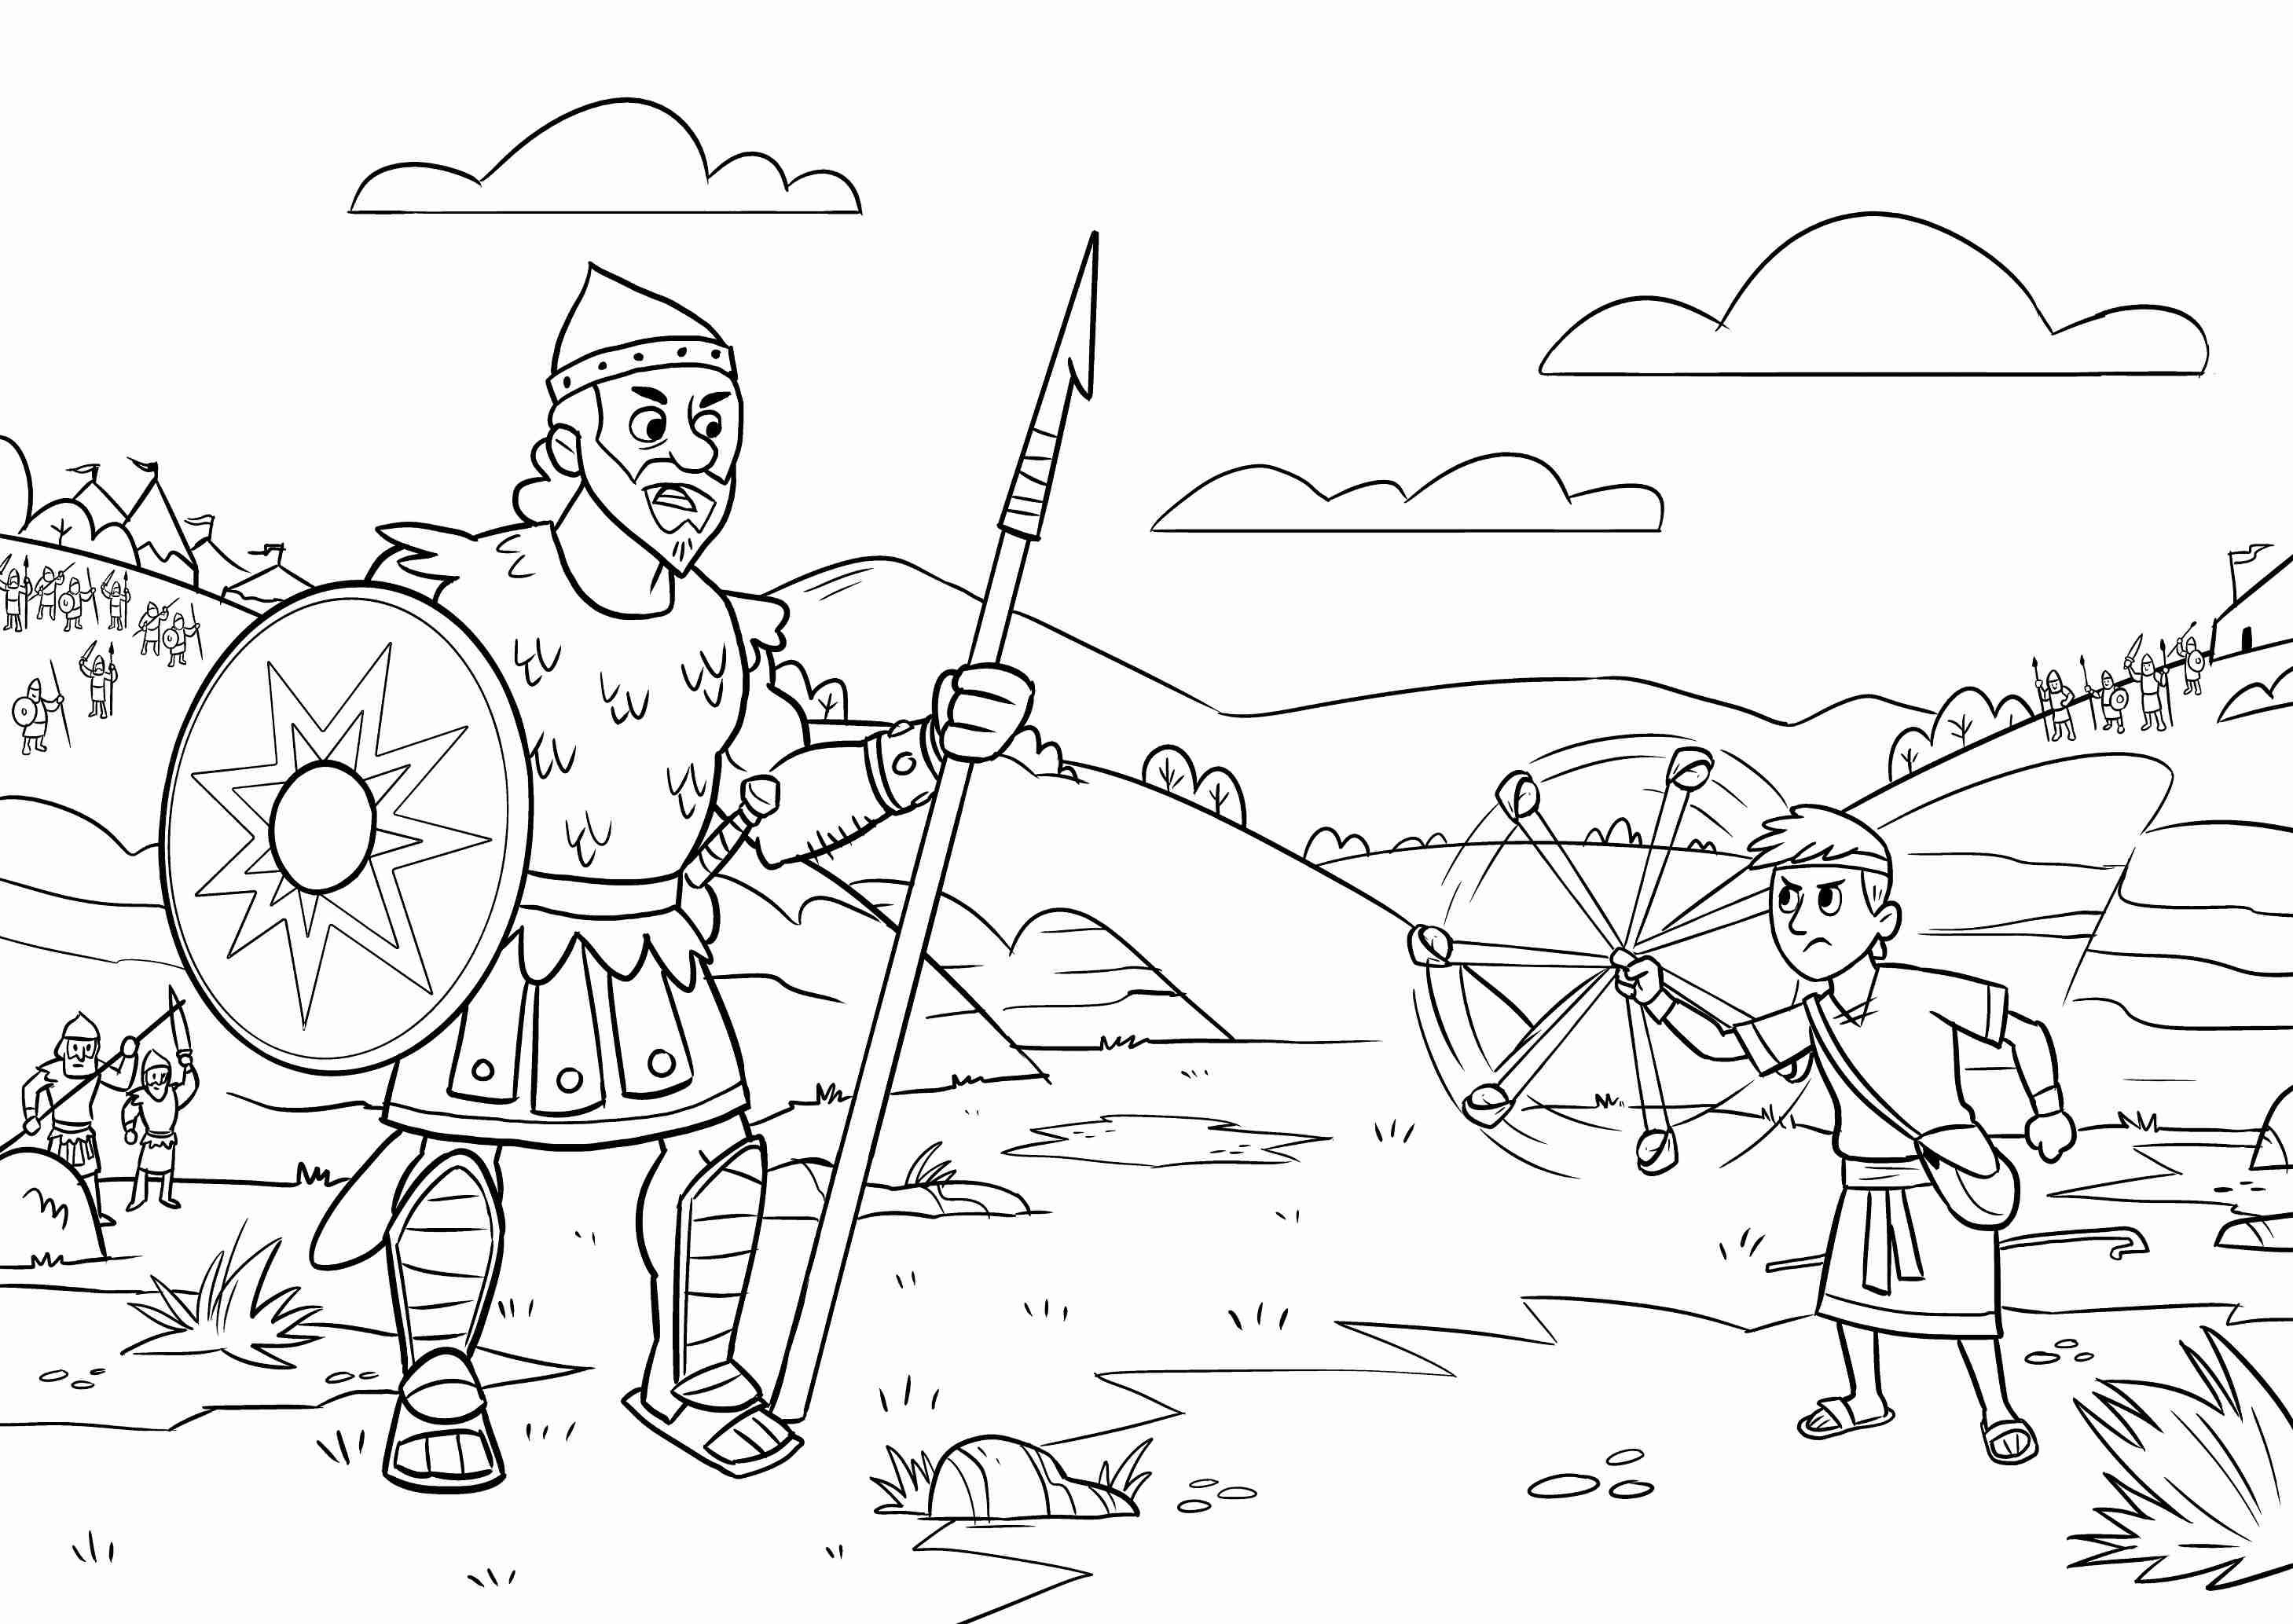 david-and-goliath-coloring-pages-best-coloring-pages-for-kids